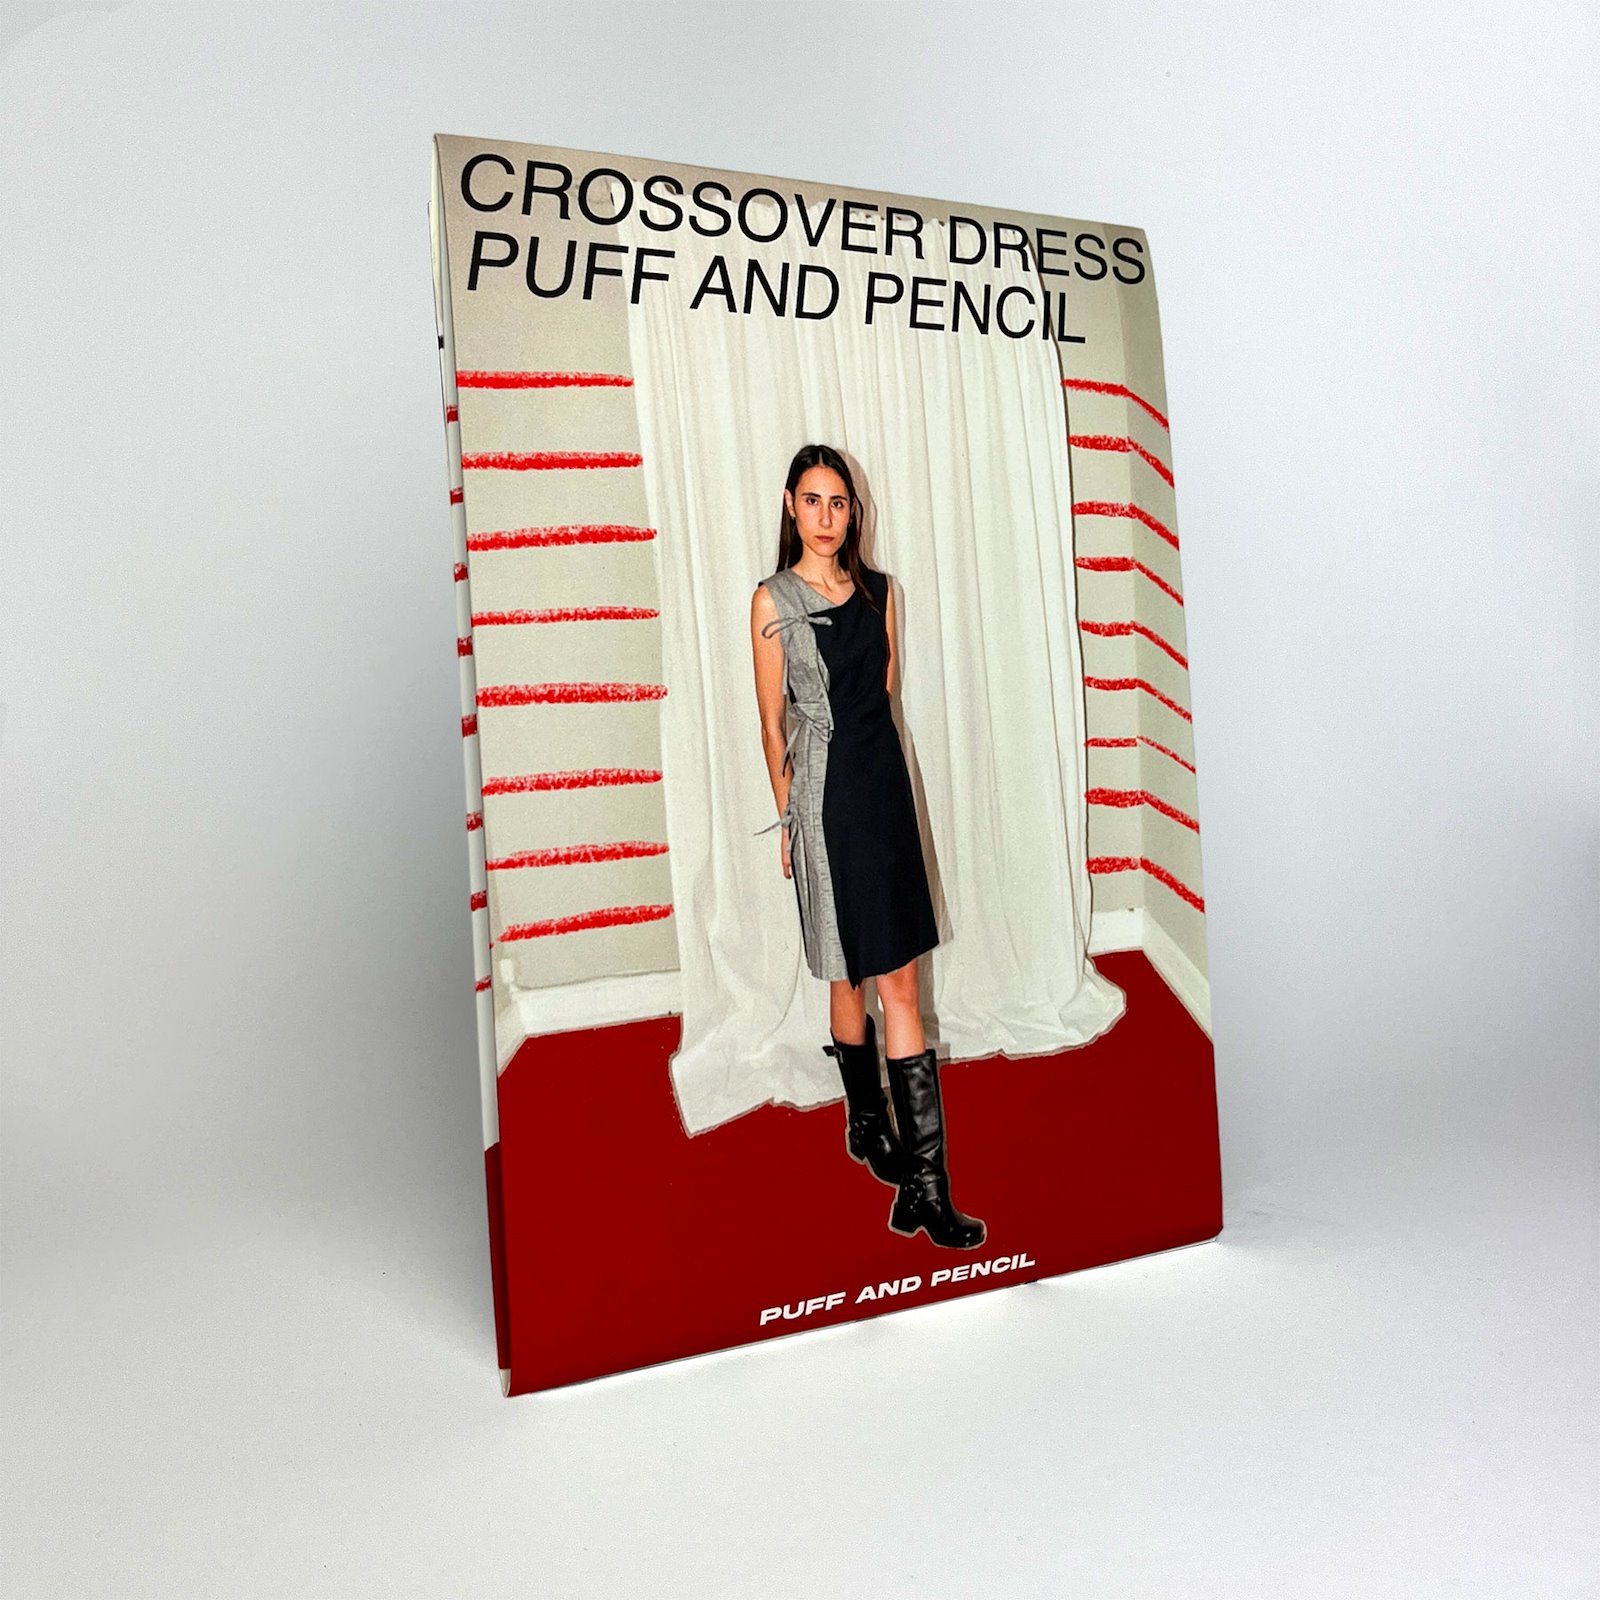 Puff and Pencil Crossover dress 1100300_pack.jpg